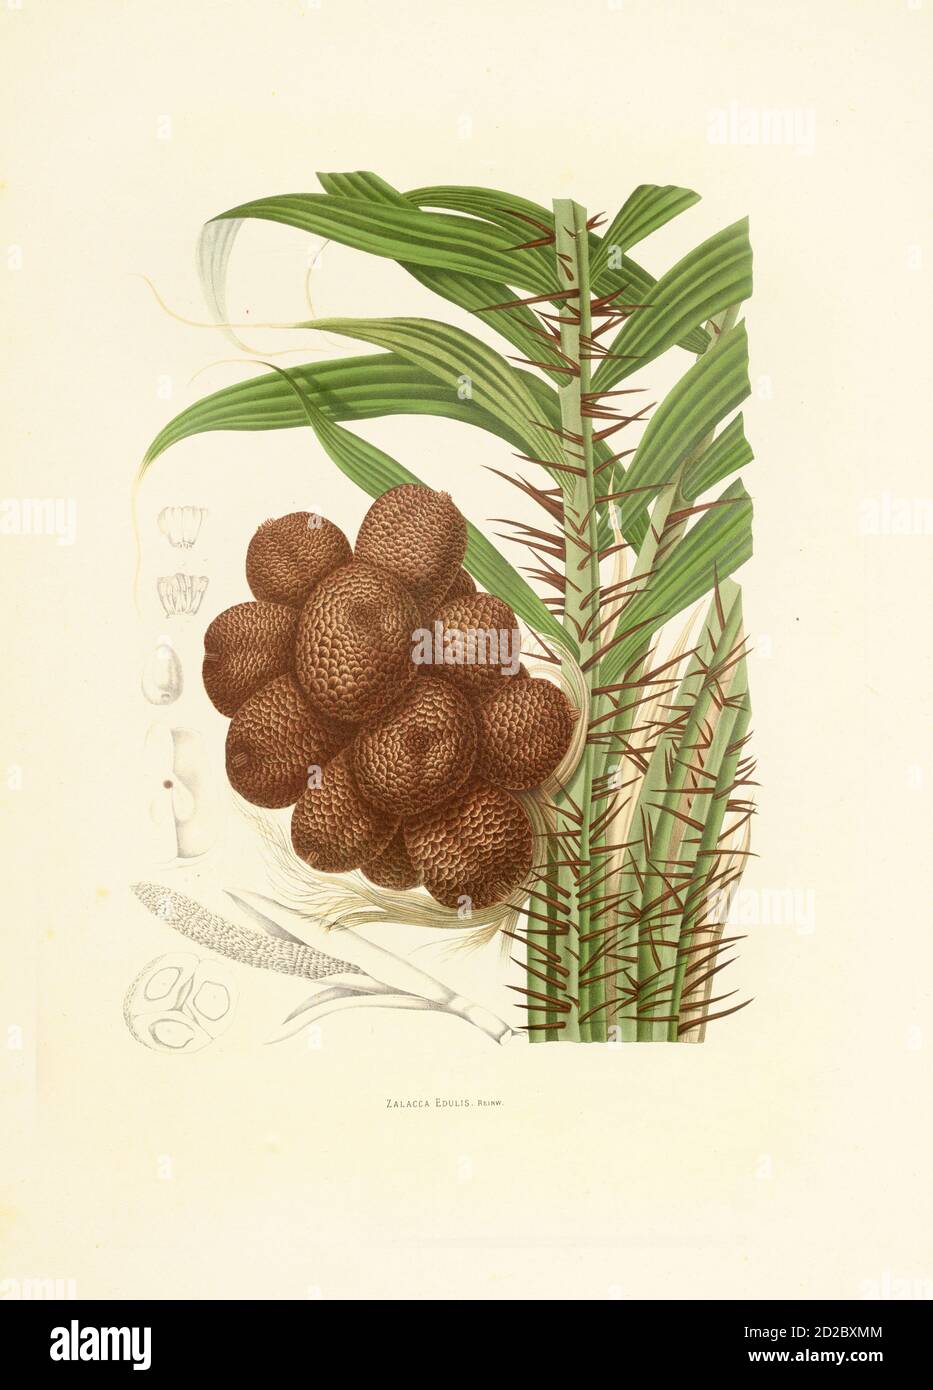 Antique 19th-century illustration of a salacca zalacca (also known as salak or snake fruit). Engraving by Berthe Hoola van Nooten from the book Fleurs Stock Photo